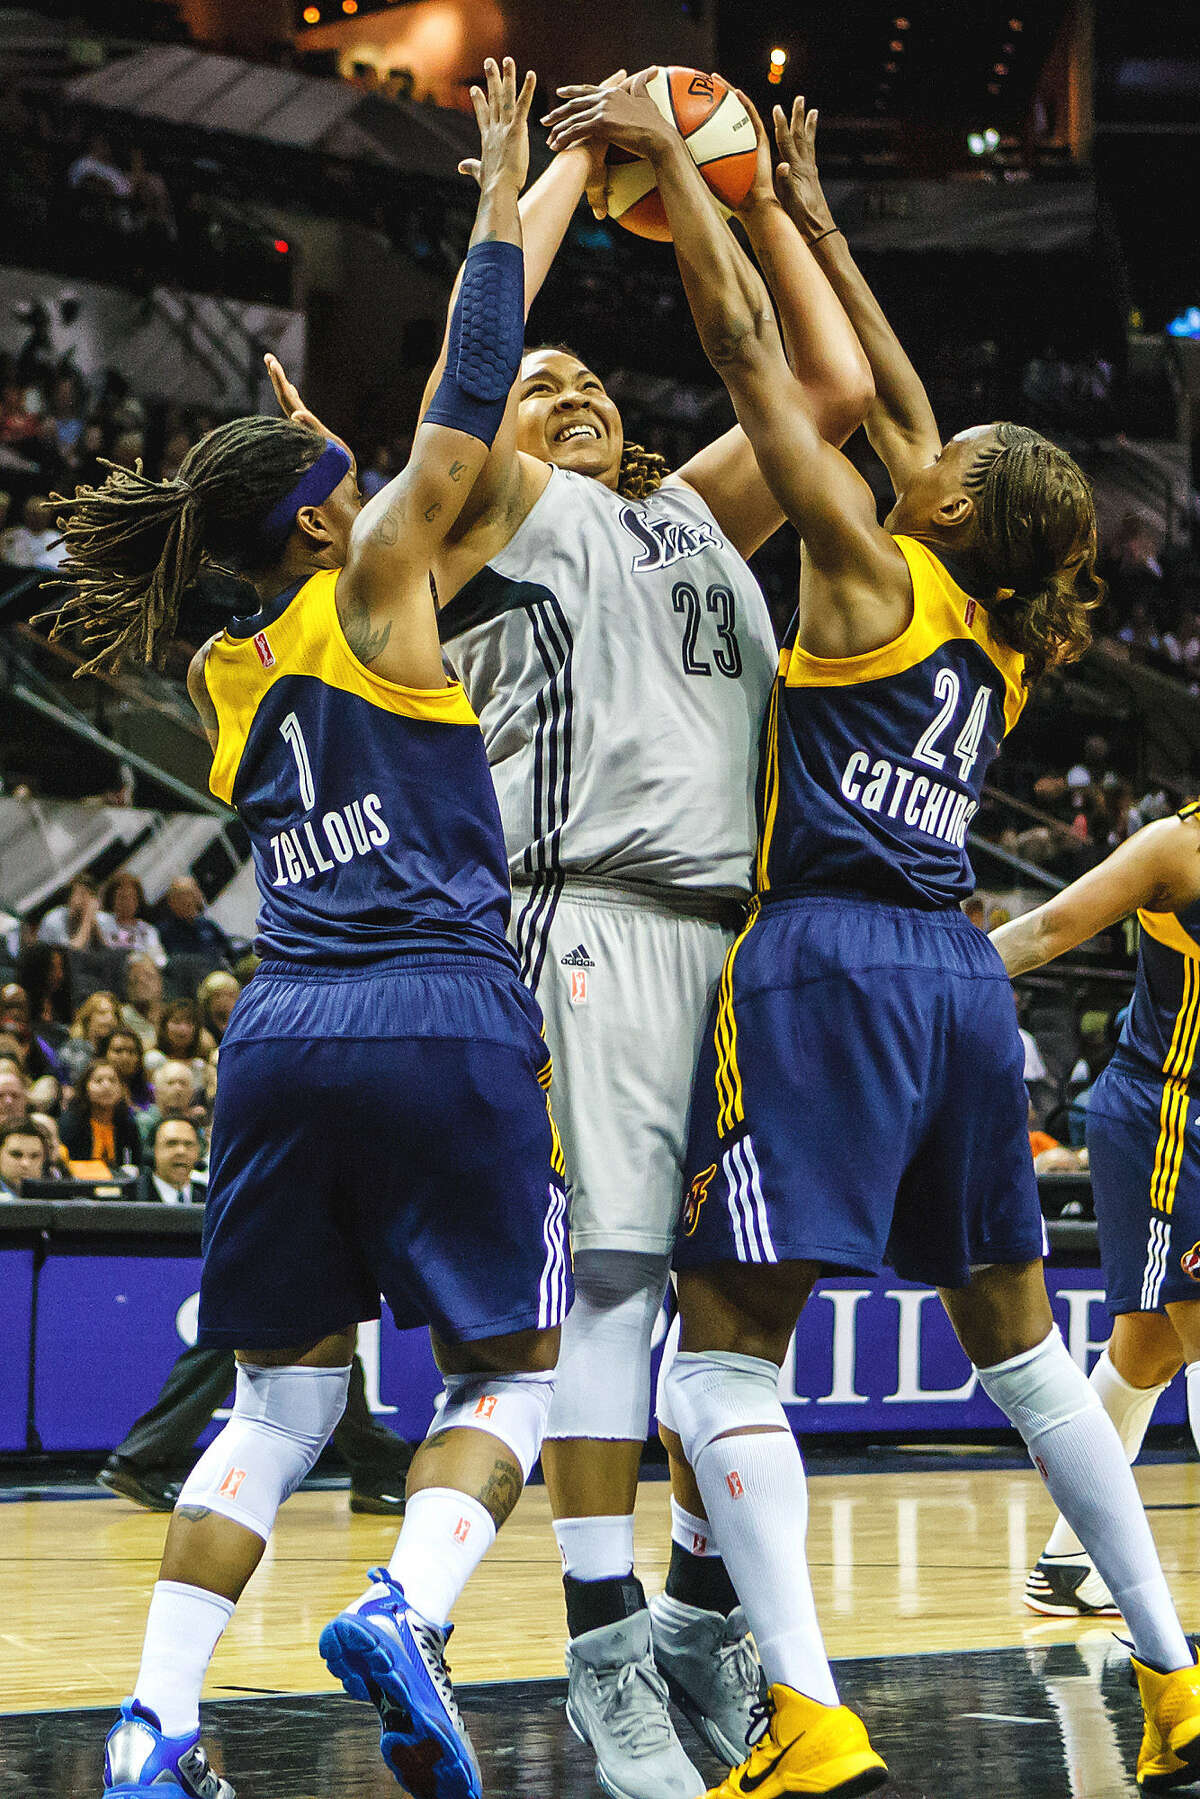 Shavonte Zellous (left) and Tamika Catchings, who each scored 19 points for Indiana, defend the Silver Stars' Danielle Adams.